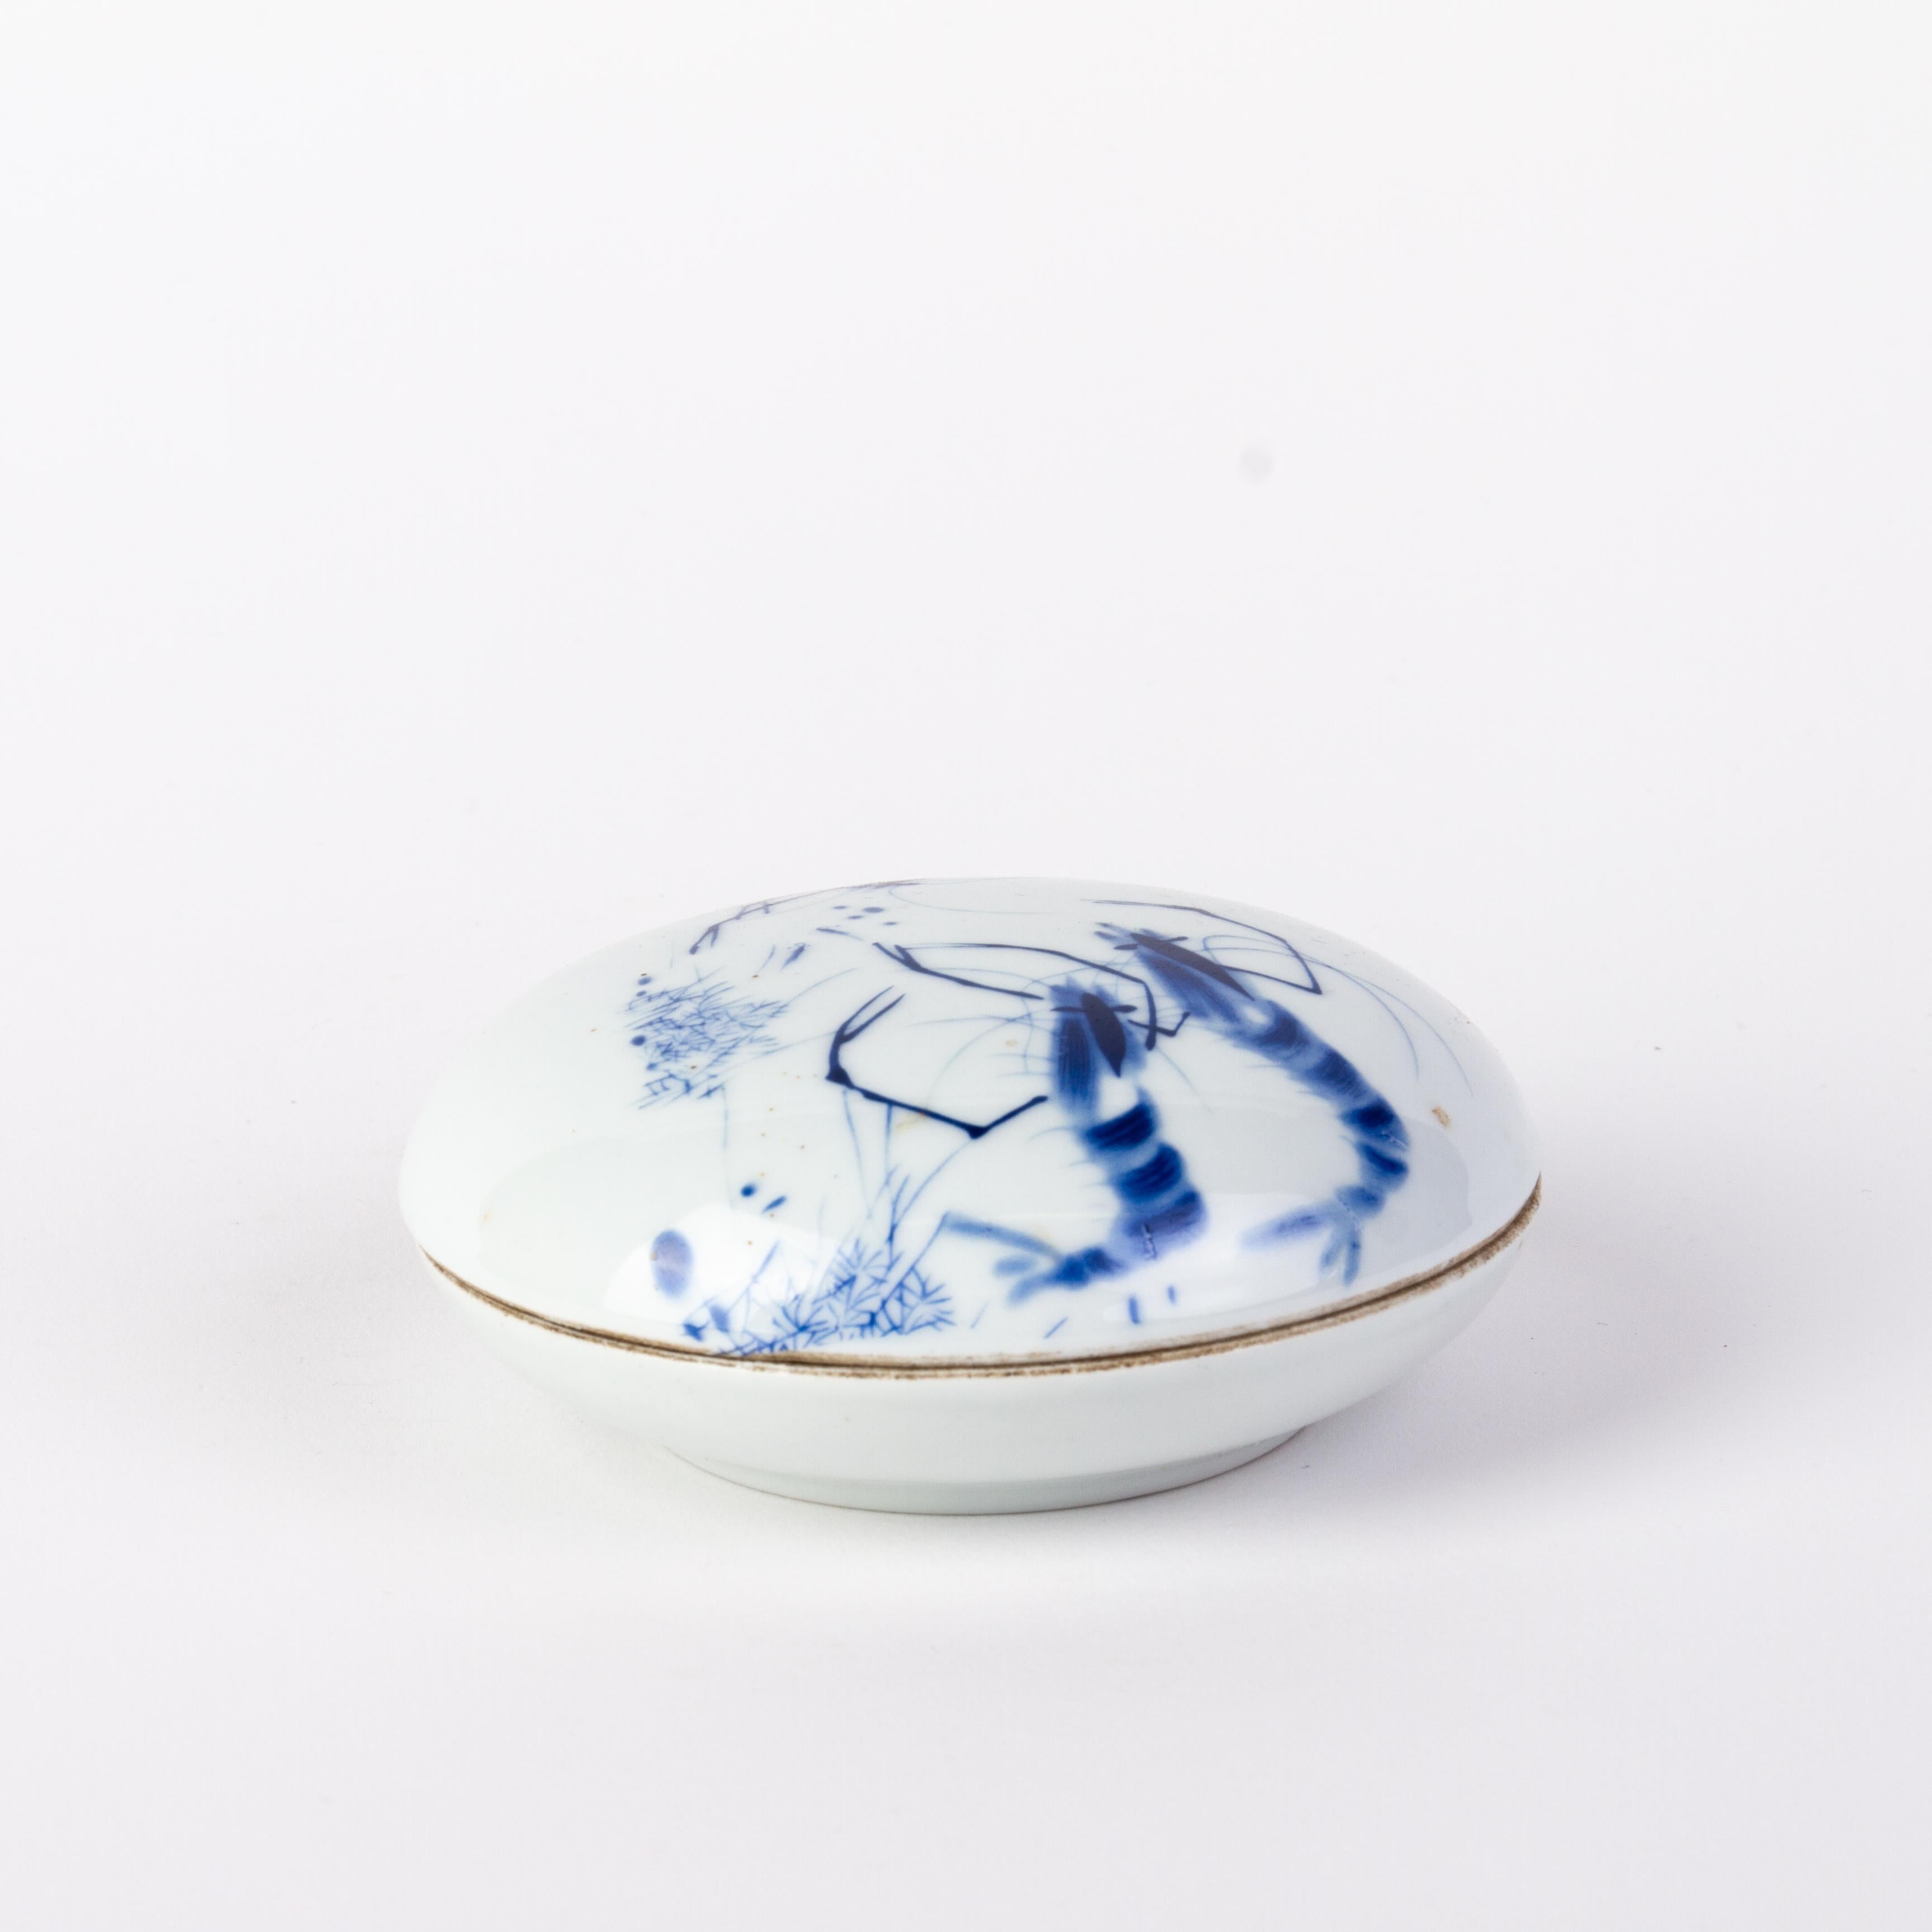 Chinese Qing dynasty Blue & White Porcelain Lidded Paste Box 19th Century 
Good condition overall
From a private collection.
Free international shipping.